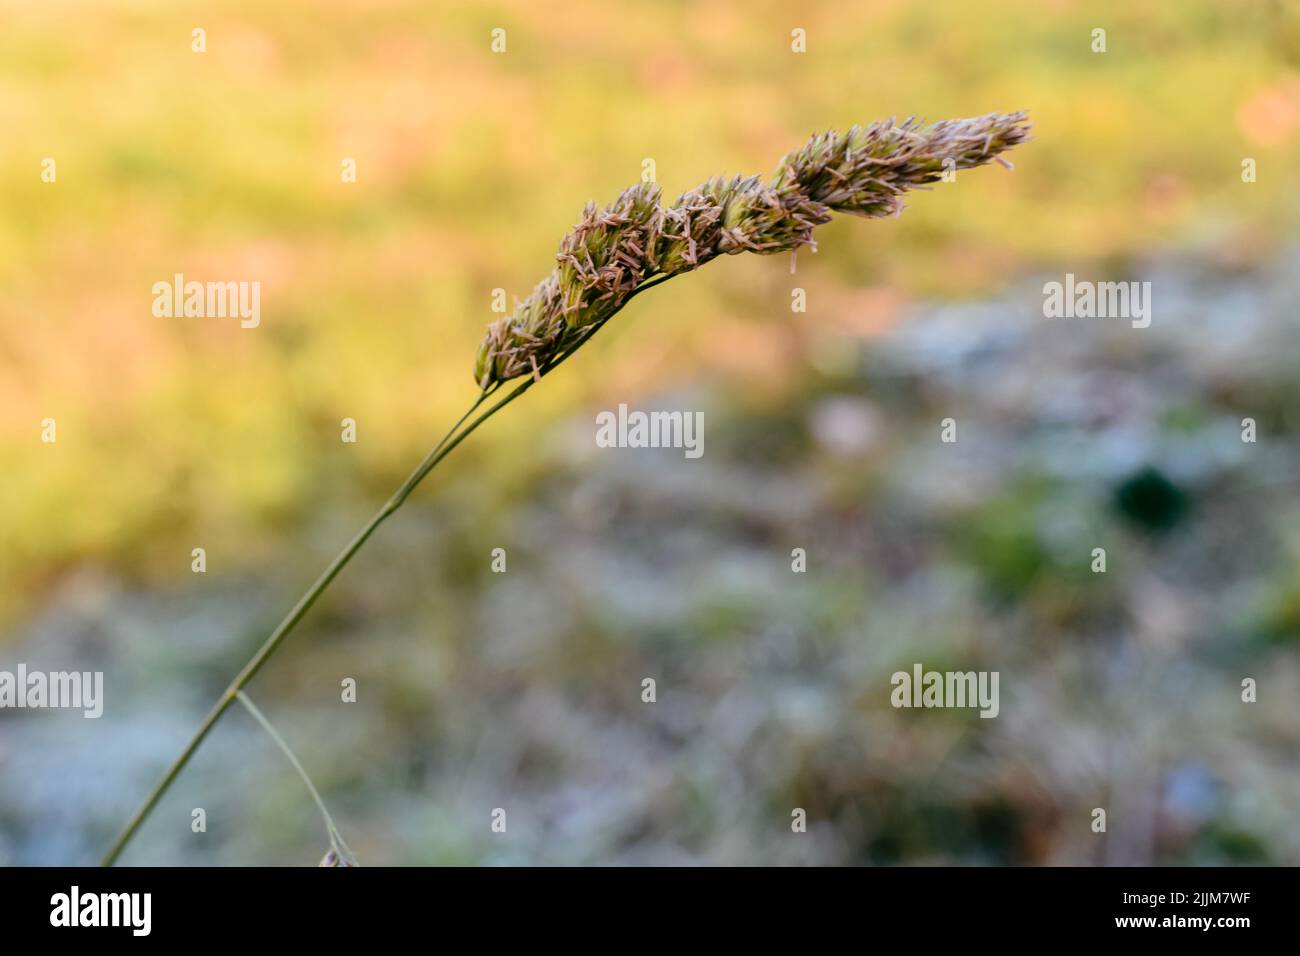 A shallow focus of a brown grass on sunrise with blurred sunny background Stock Photo